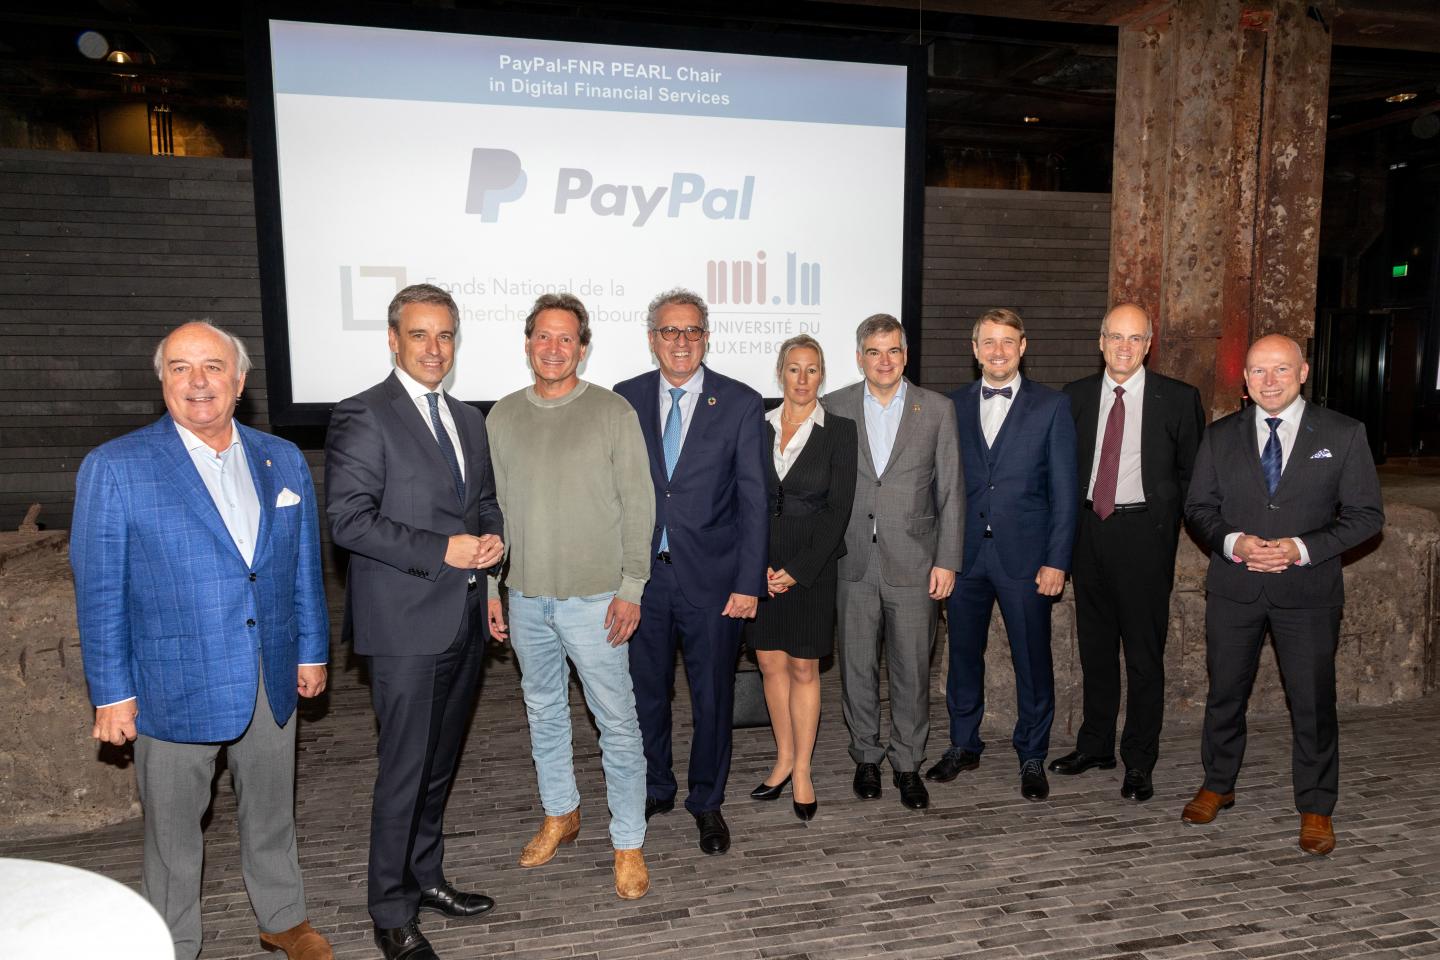 Presentation of the new PayPal-FNR PEARL Chair